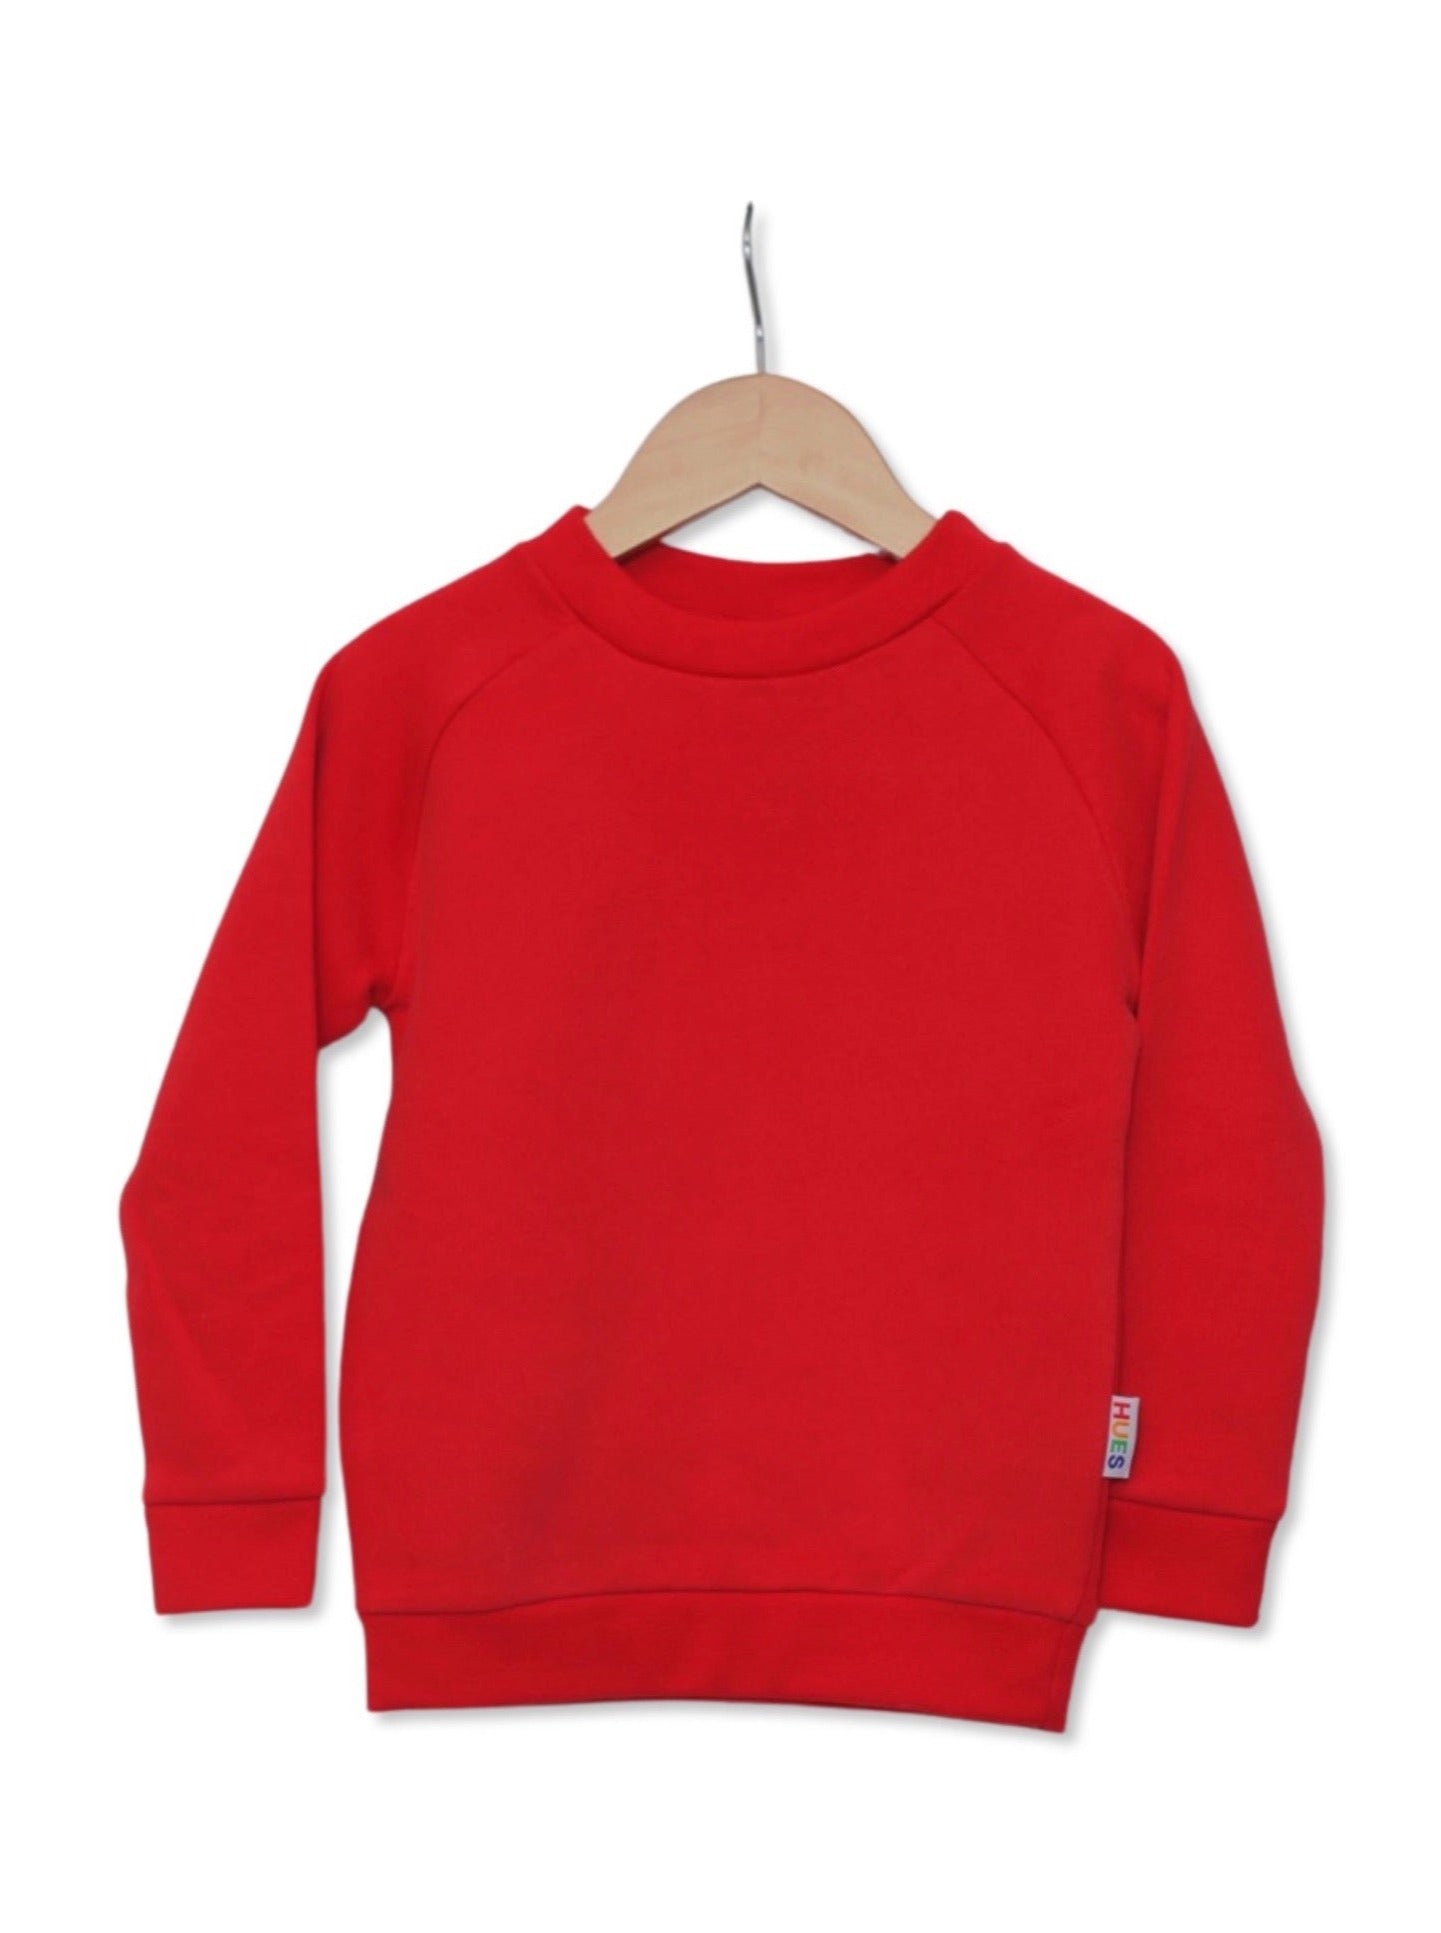 Kids Unisex Red Jumper Front View- Hues Clothing